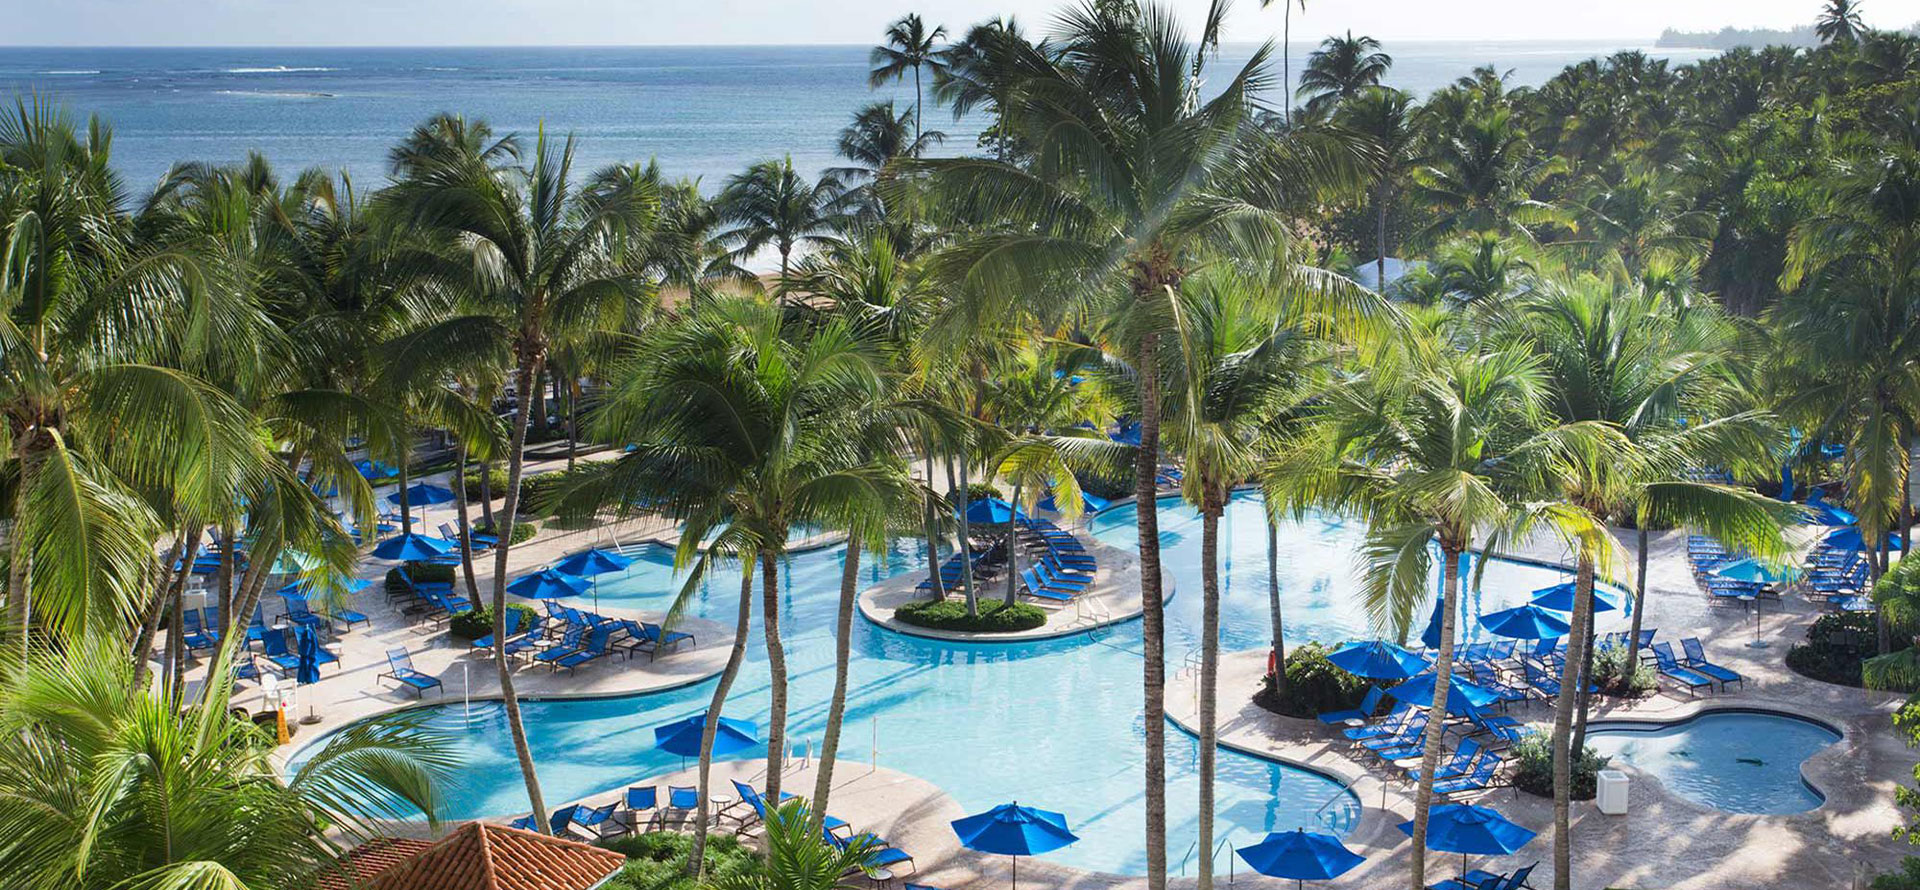 View of one of the all inclusive family friendly resorts in puerto rico.